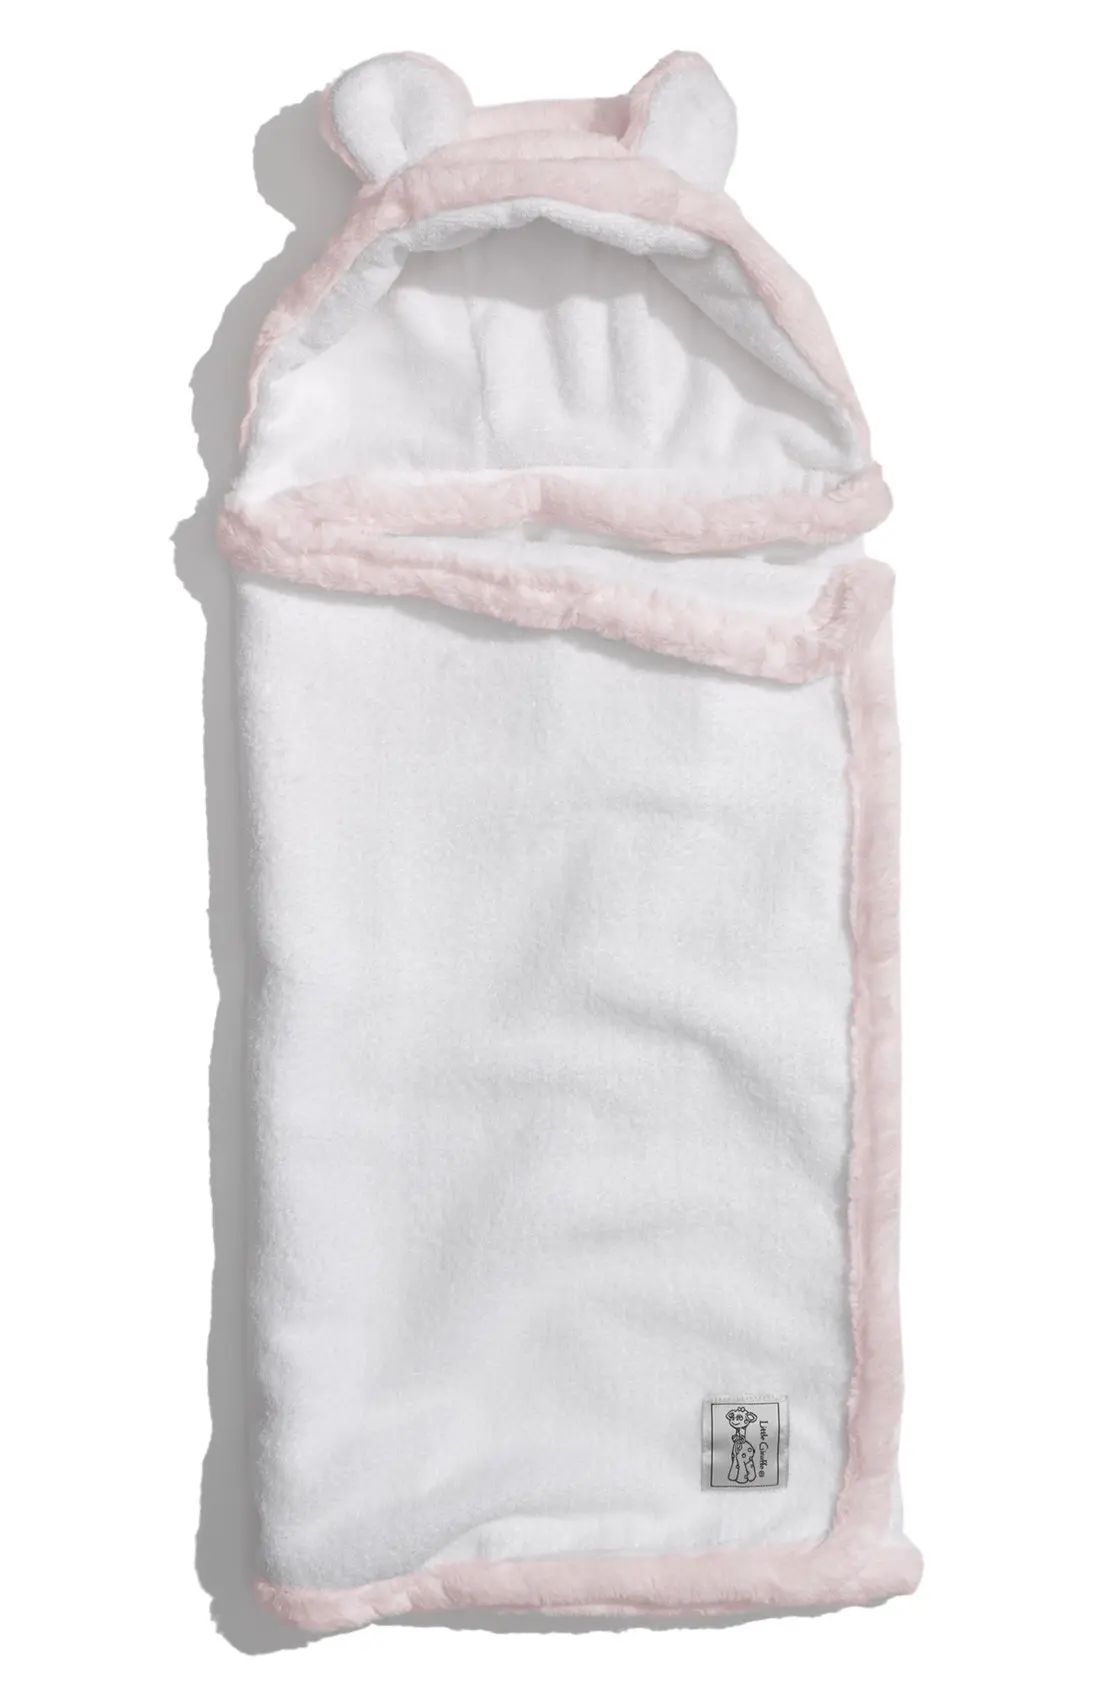 Infant Little Giraffe Luxe Hooded Towel, Size One Size - Pink | Nordstrom